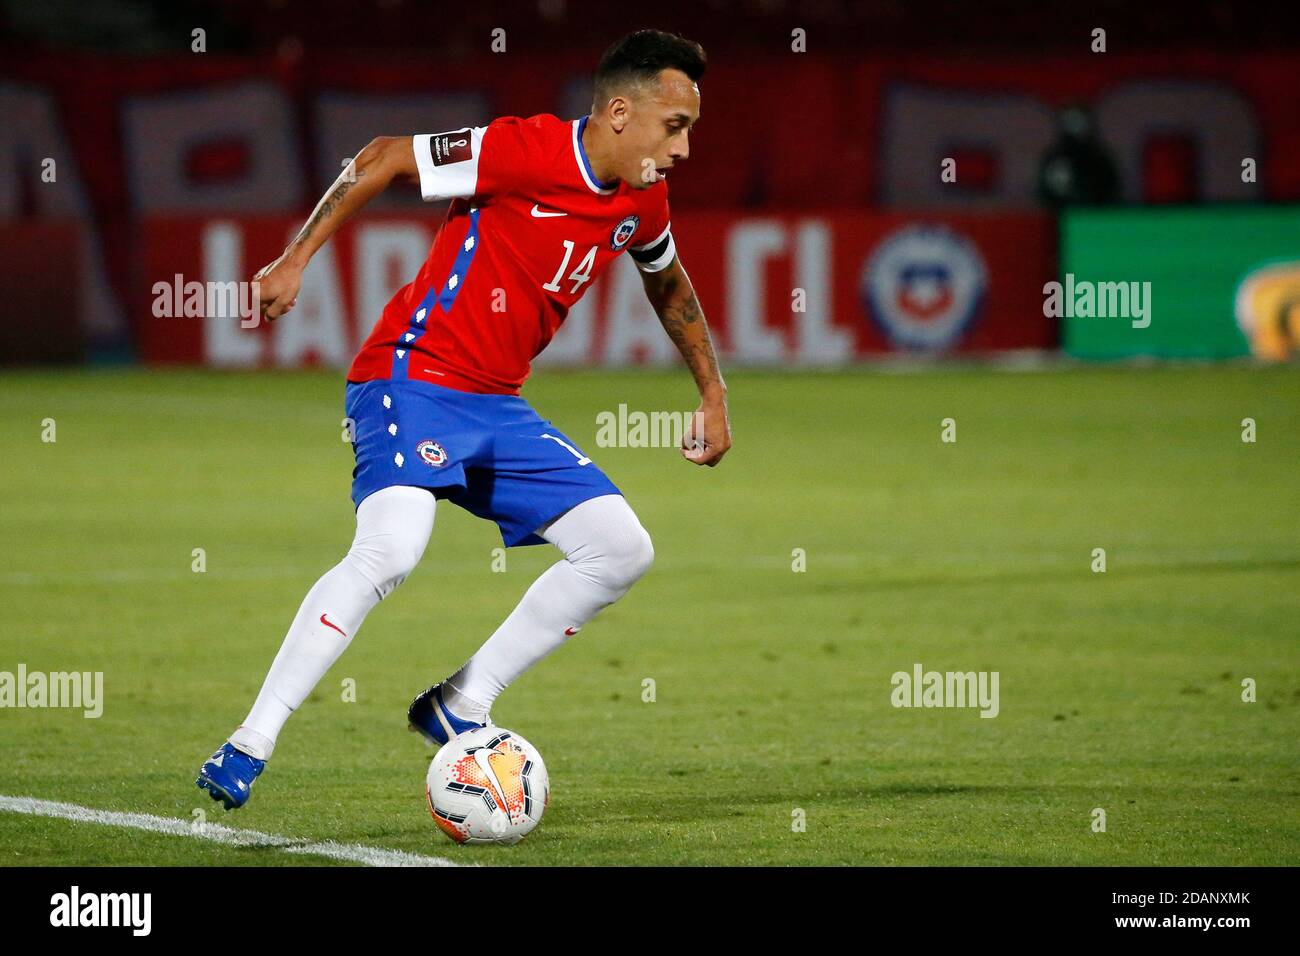 13th November 2020; National Stadium of Santiago, Santiago, Chile; World Cup 2020 Football qualification, Chile versus Peru;  Fabian Orellana of Chile cuts back on the ball Stock Photo